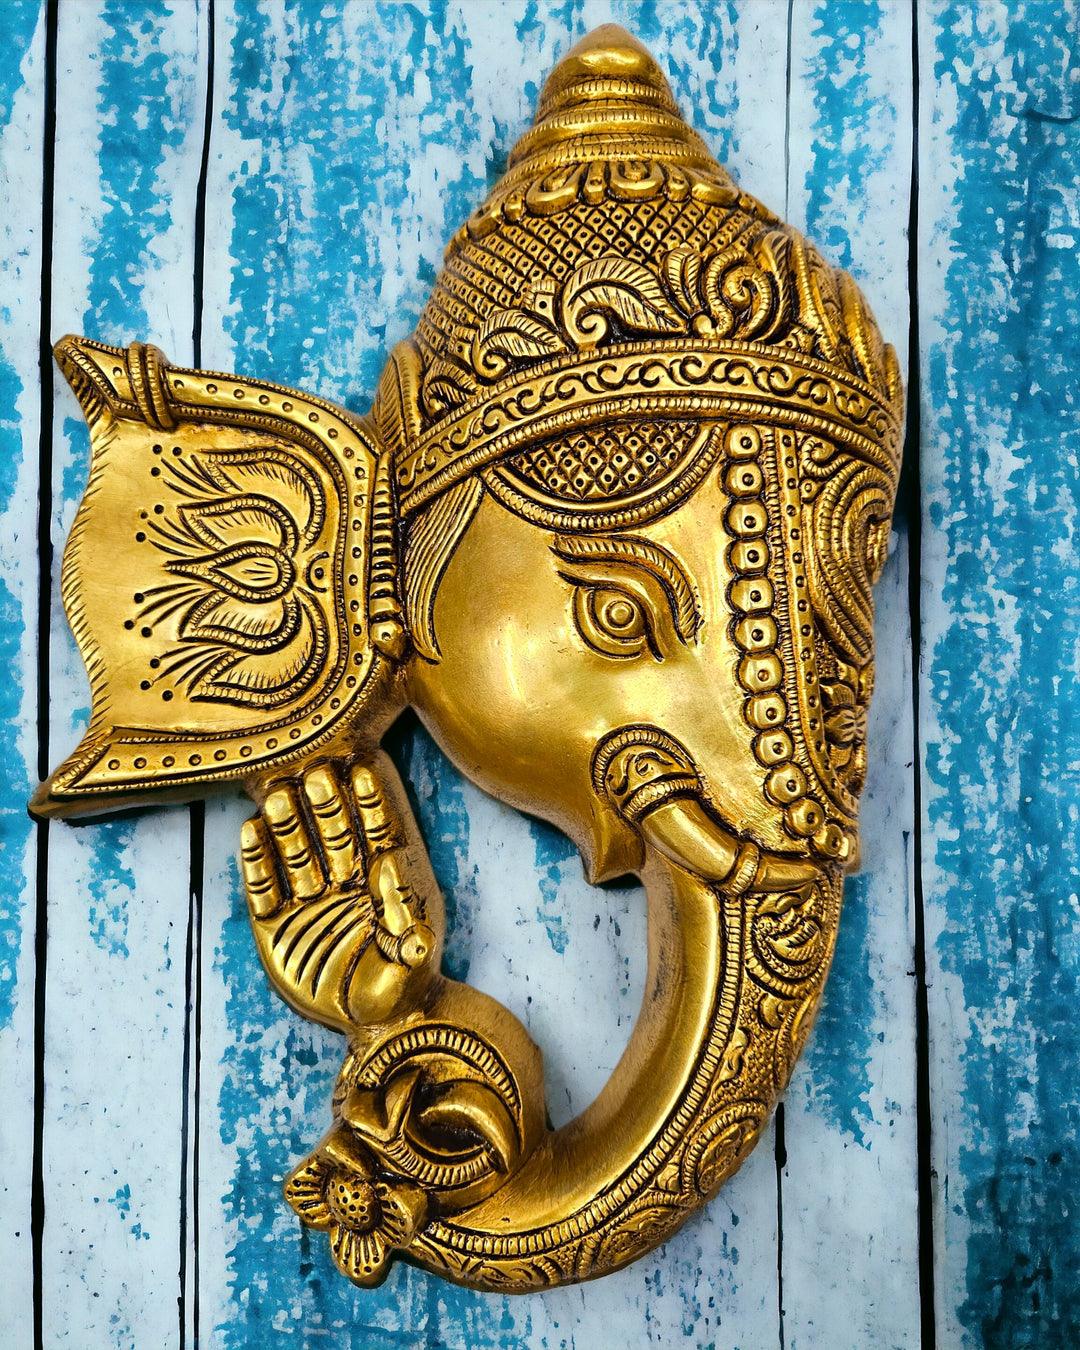 Brass Lord Ganesha Mask Wall Hanging for Decoration (11 Inch)(Golden)